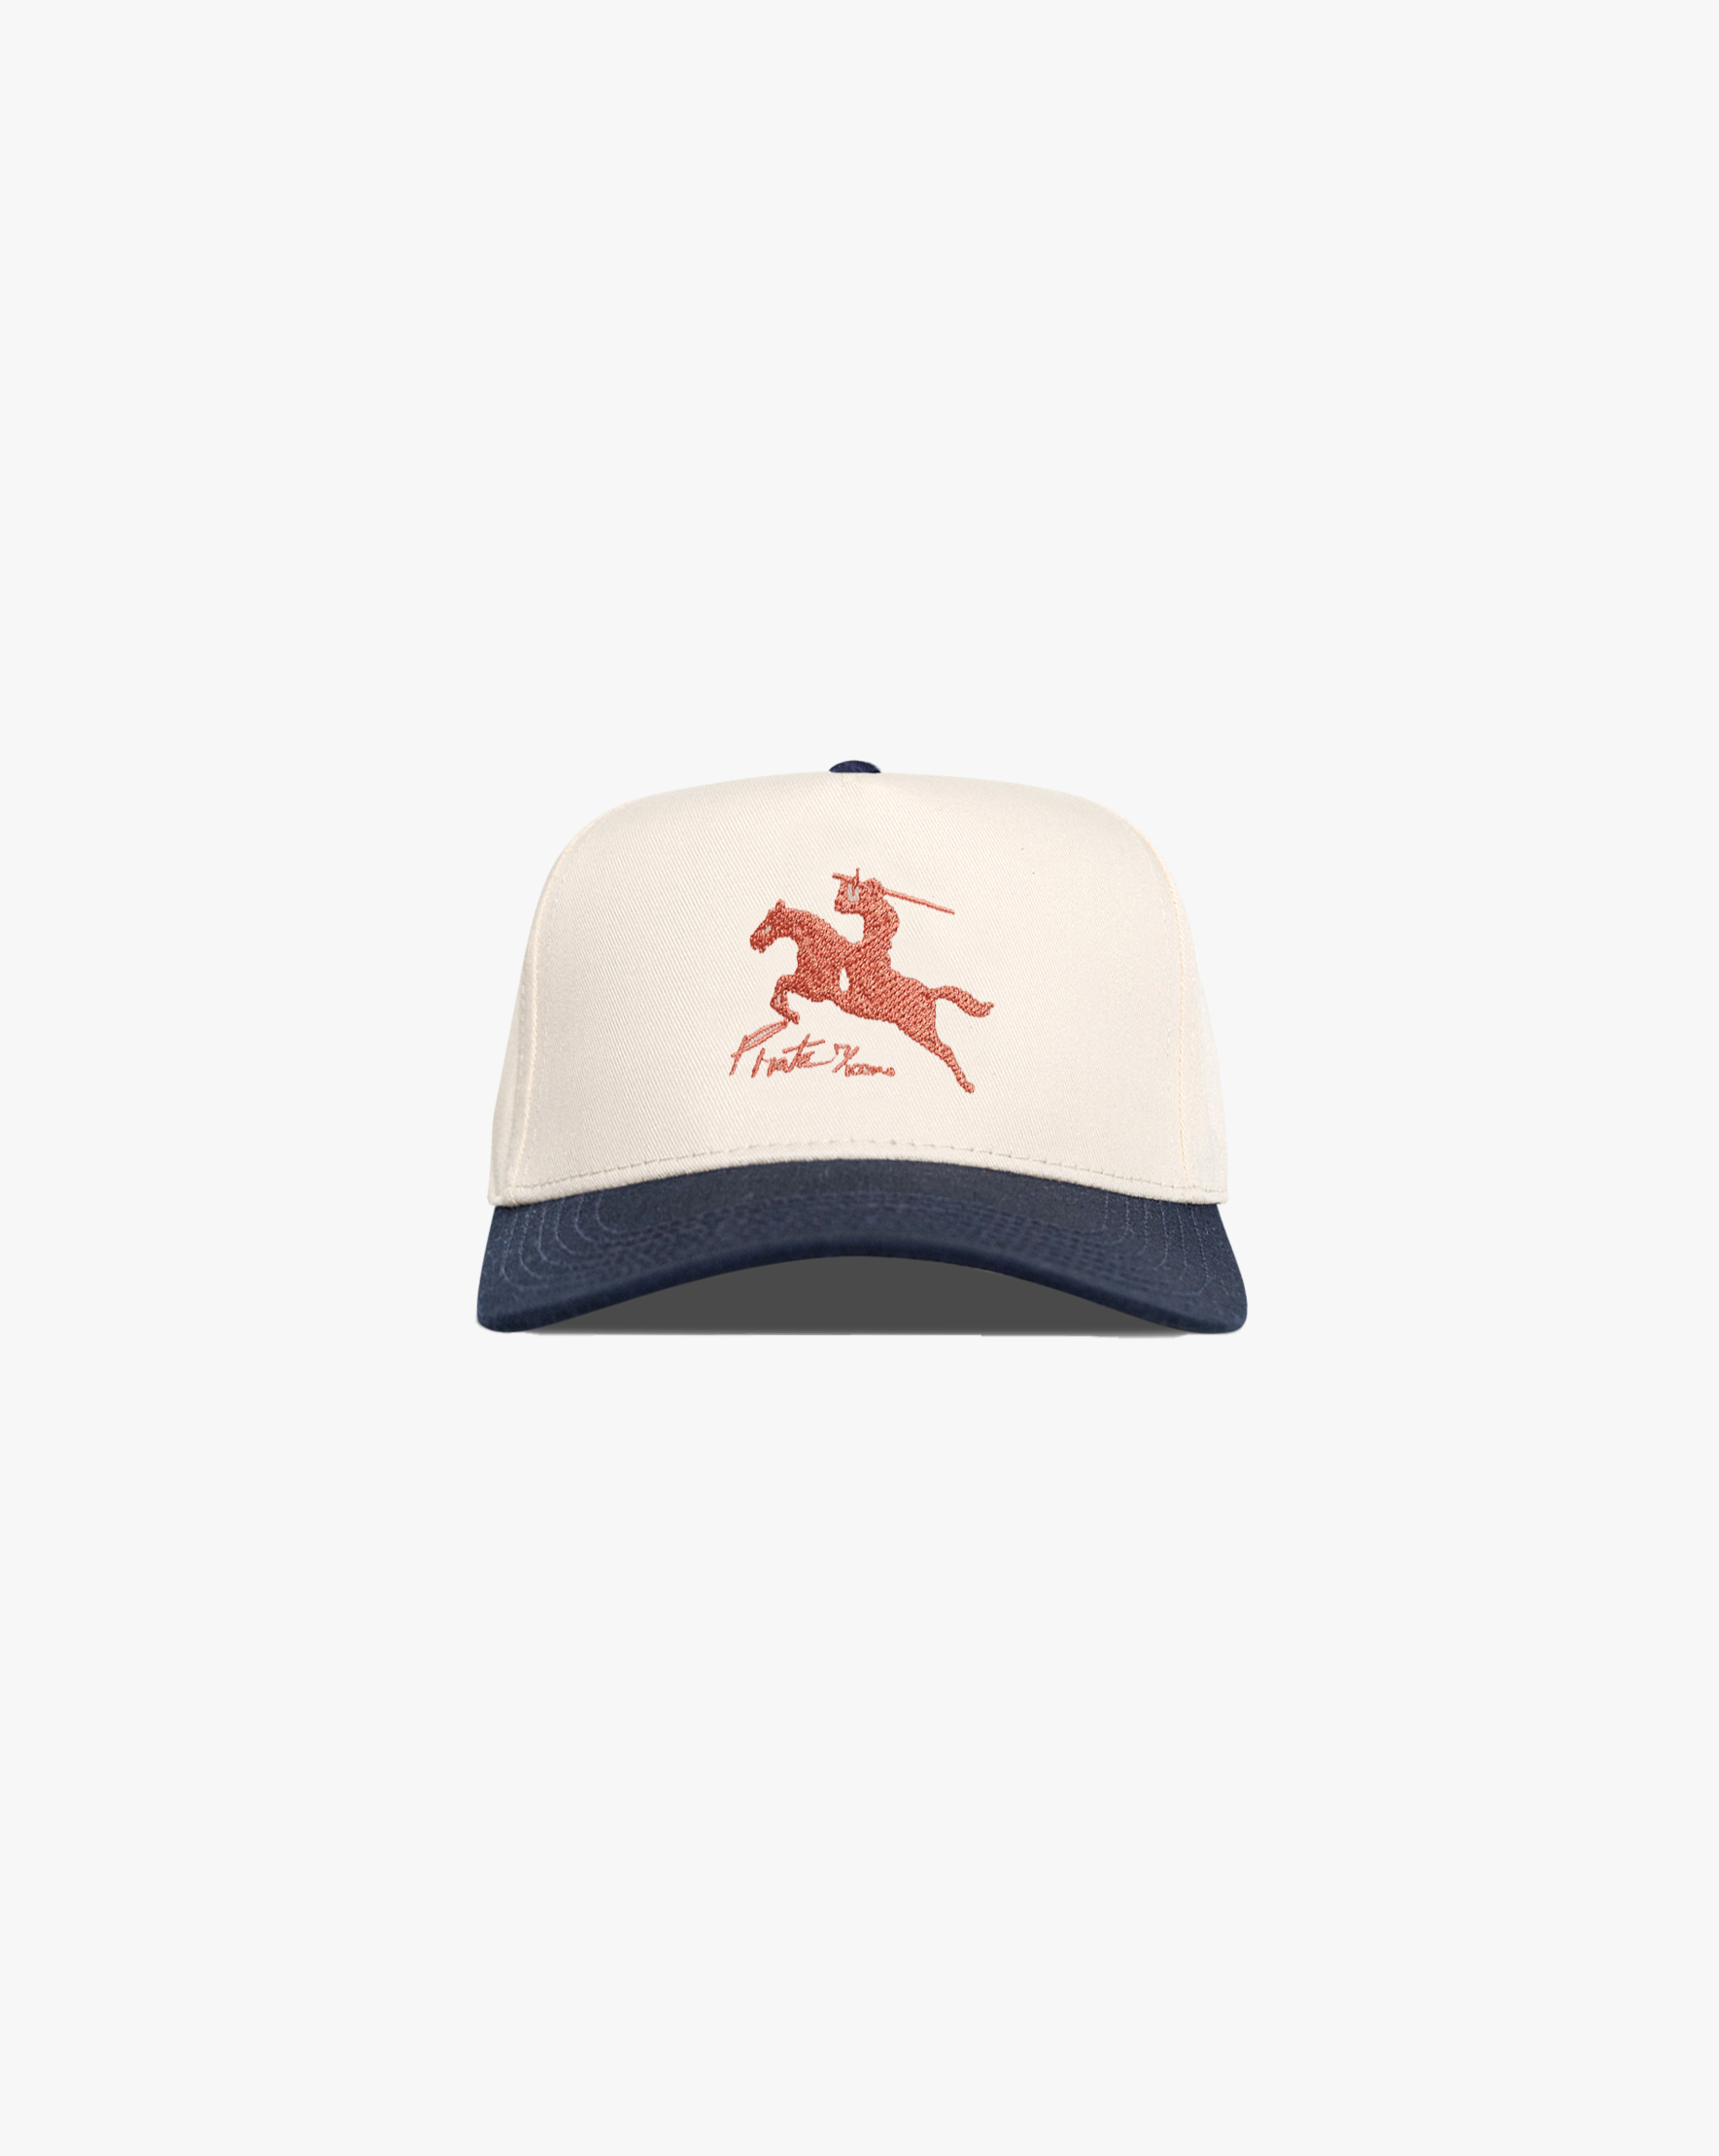 Pirate By Any Means Hat (Cream/Navy)